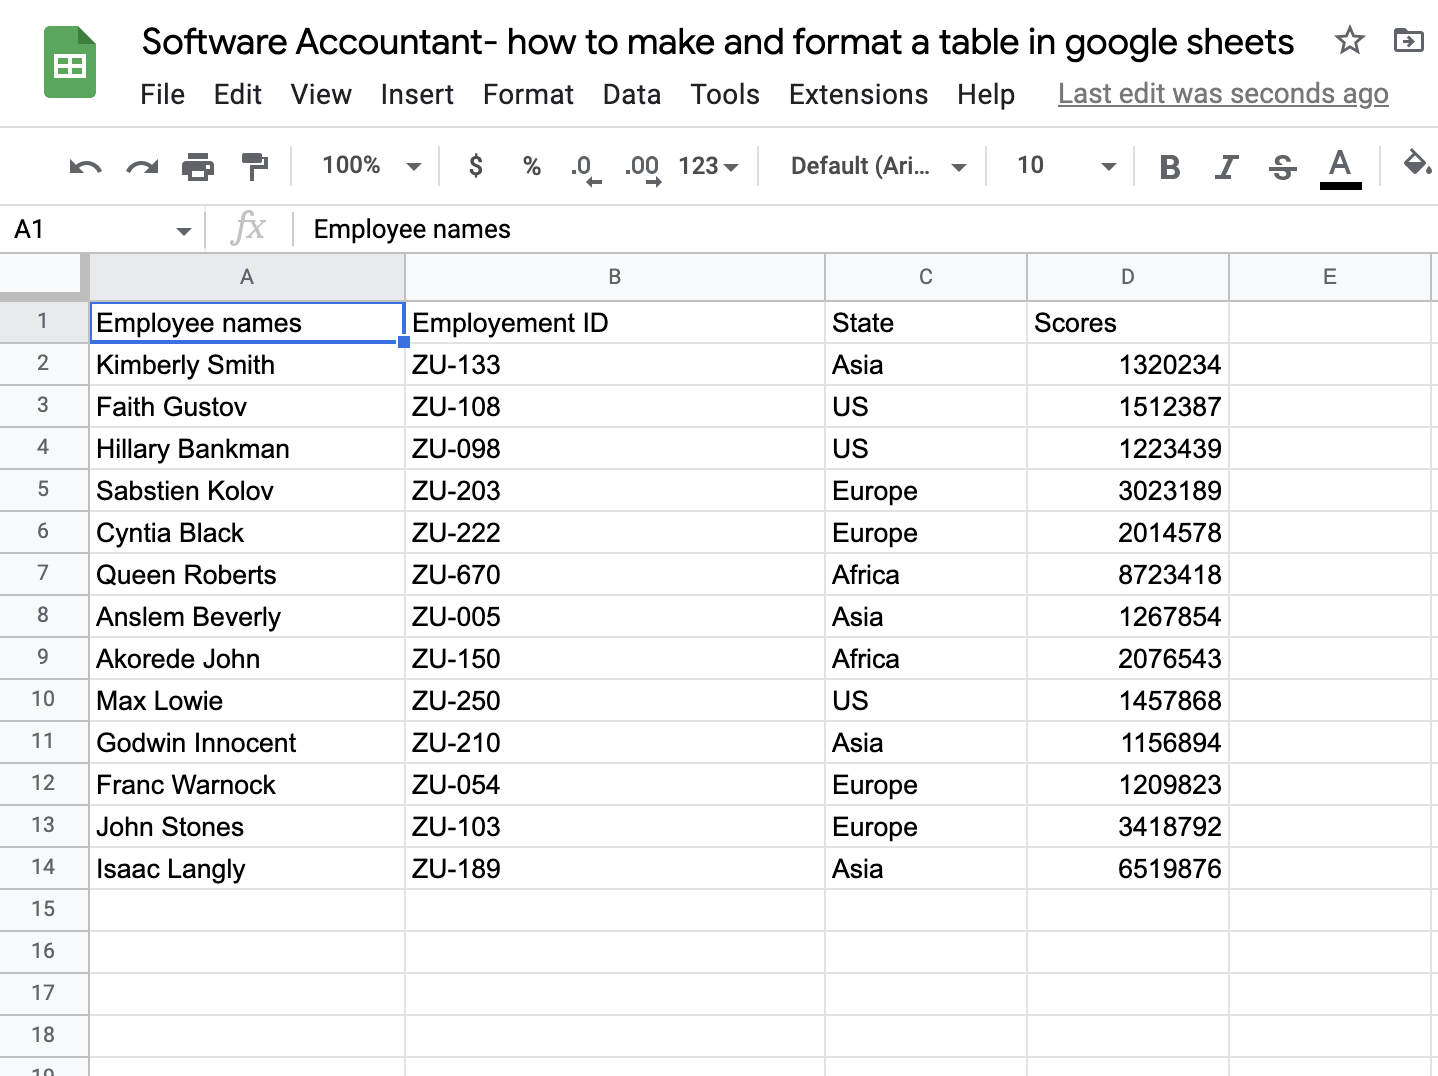 How to make a table in Google Sheets with formatting